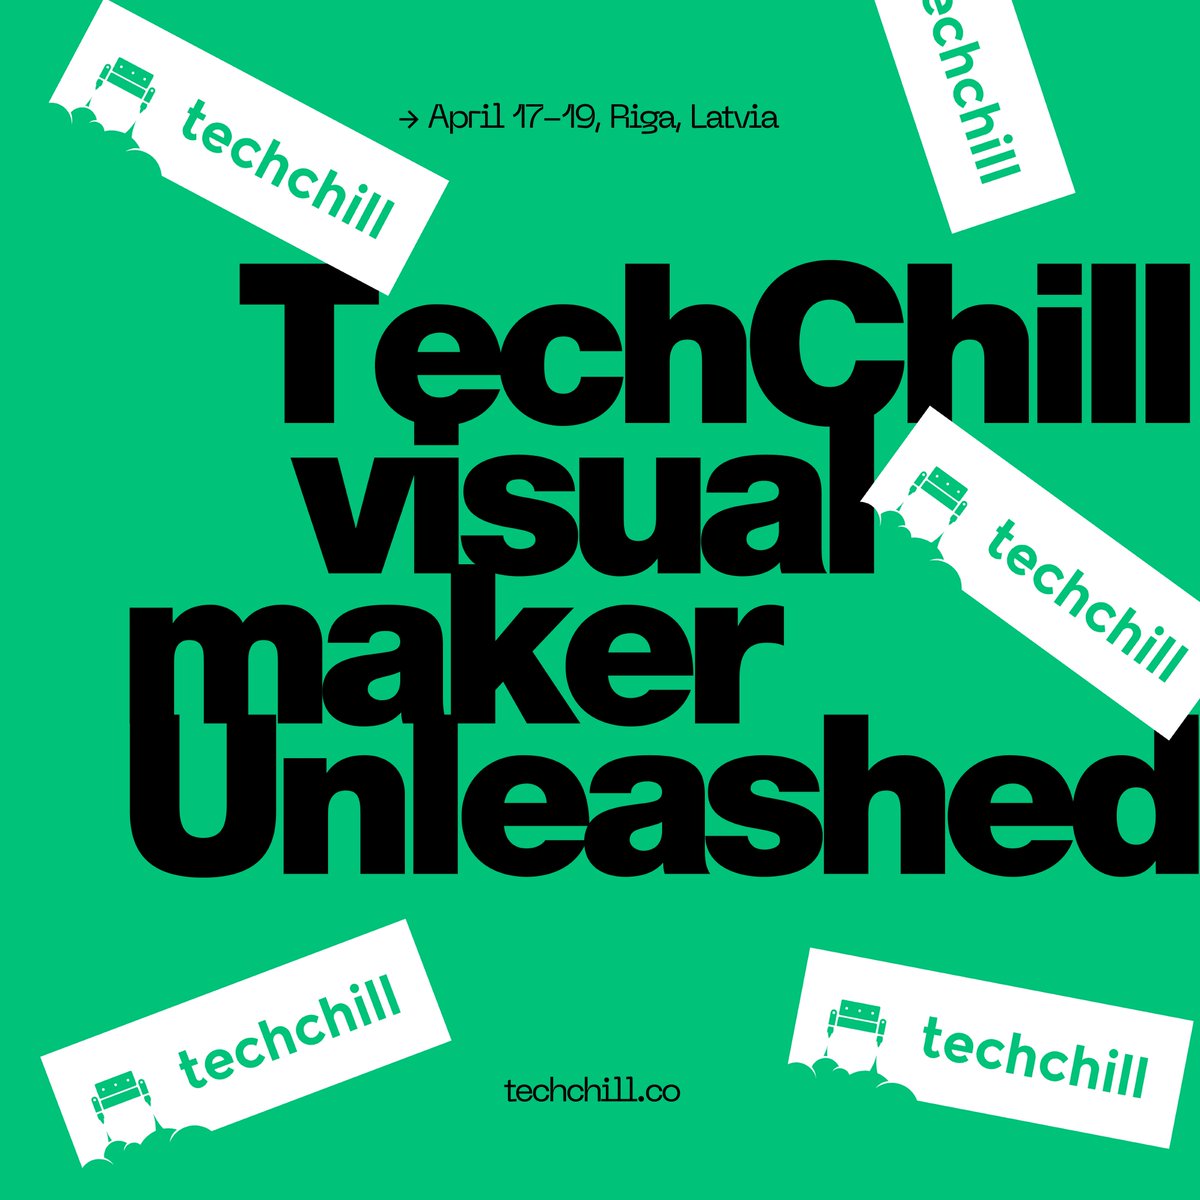 Create your OWN 'I'm coming to TechChill' visual in just TWO clicks! Let's turn social media into a TechChill paradise with your pictures! 💥 thecrowd.click/techchill